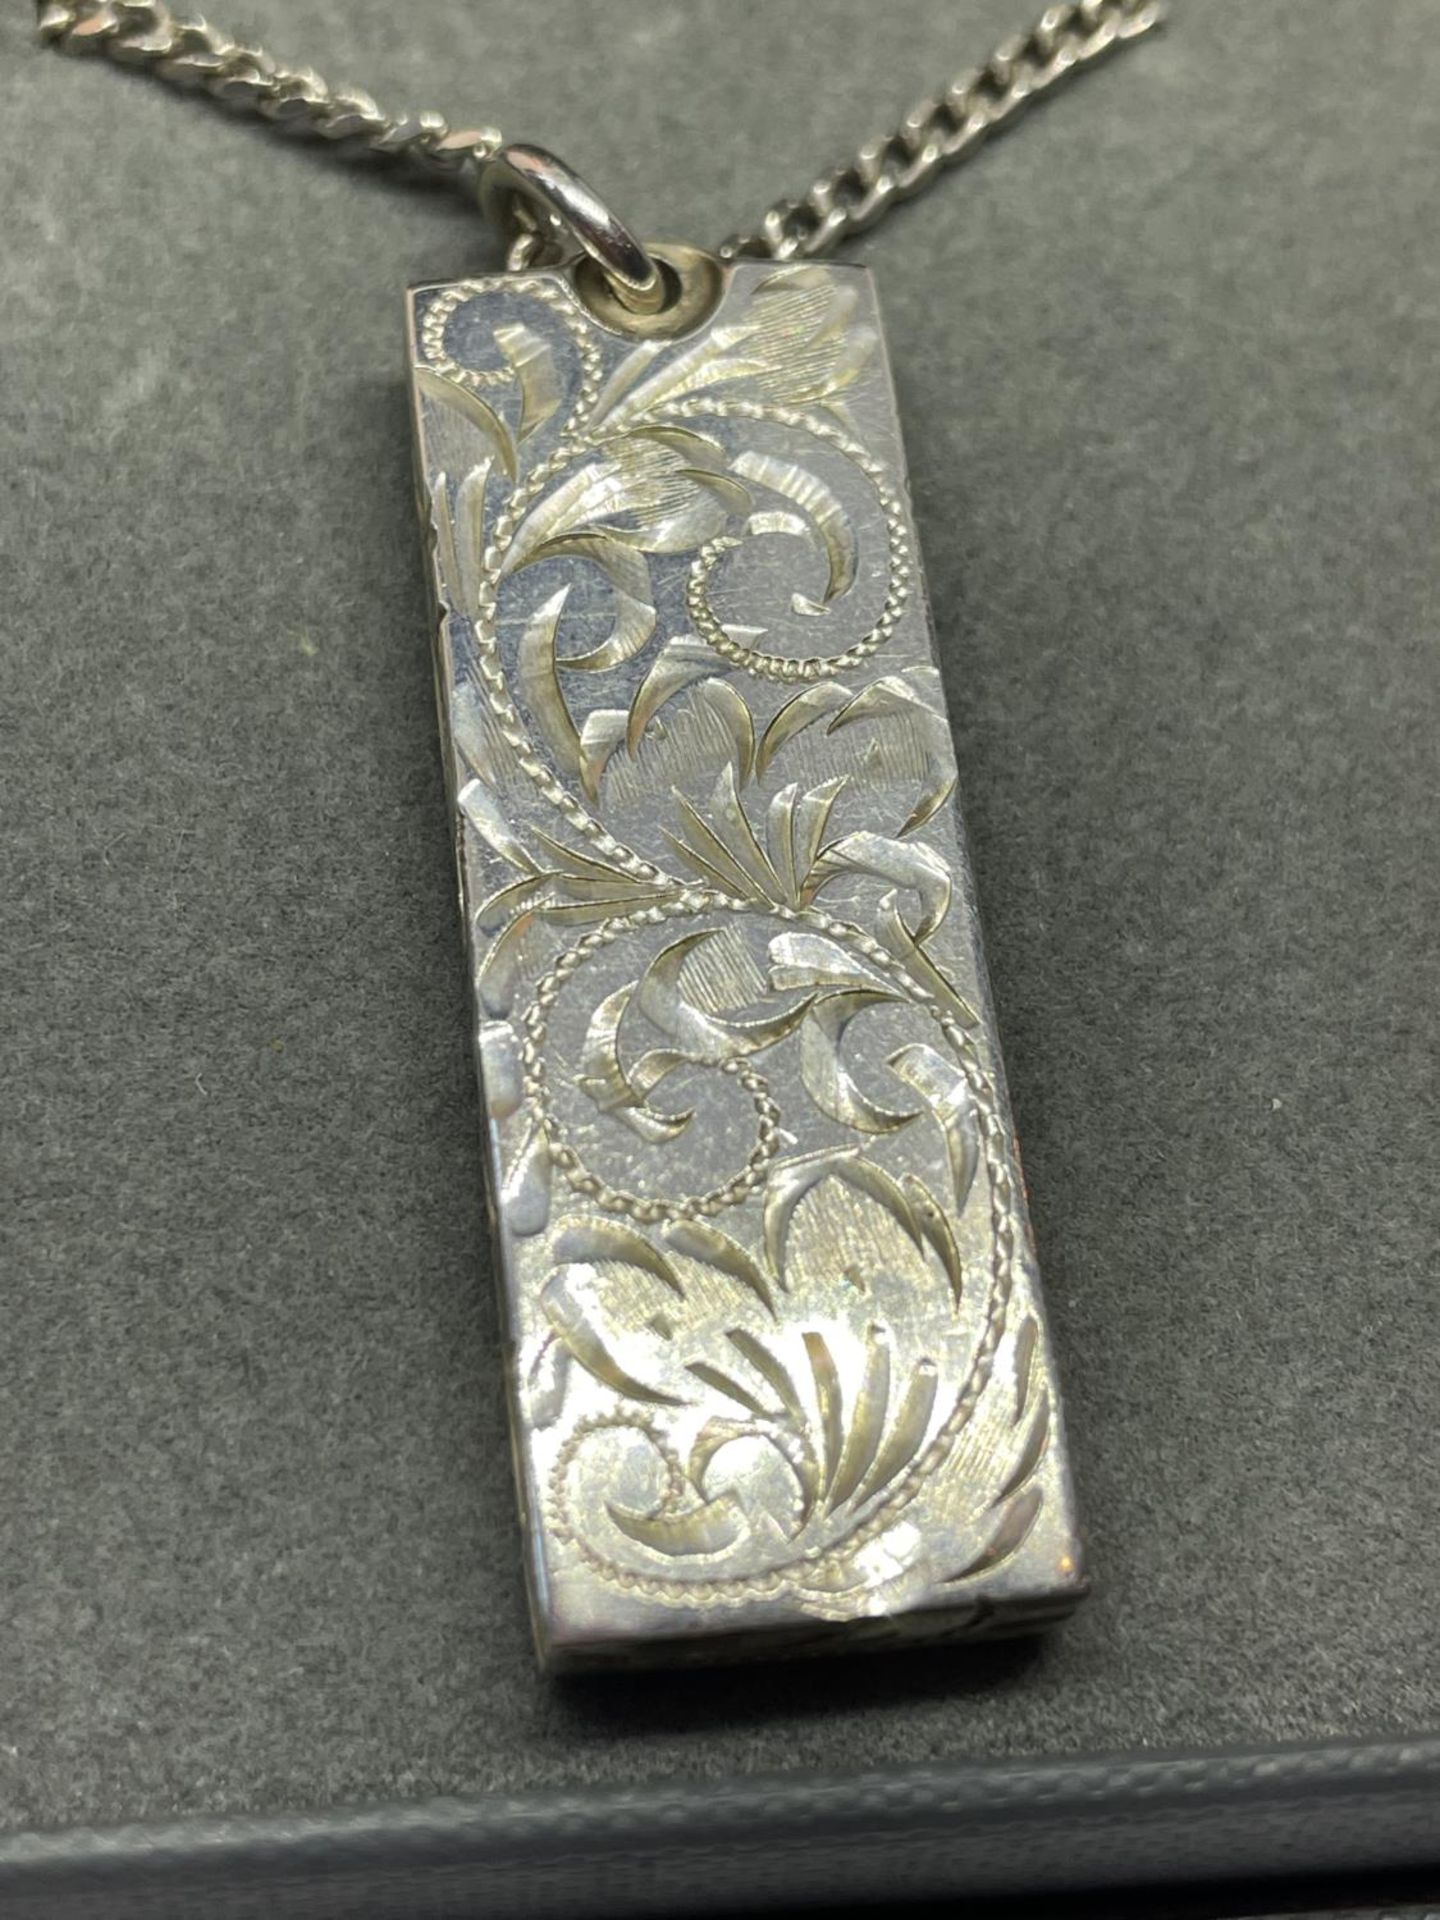 AN ORNATE SILVER INGOT AND CHAIN IN A PRESENTATION BOX - Image 3 of 3